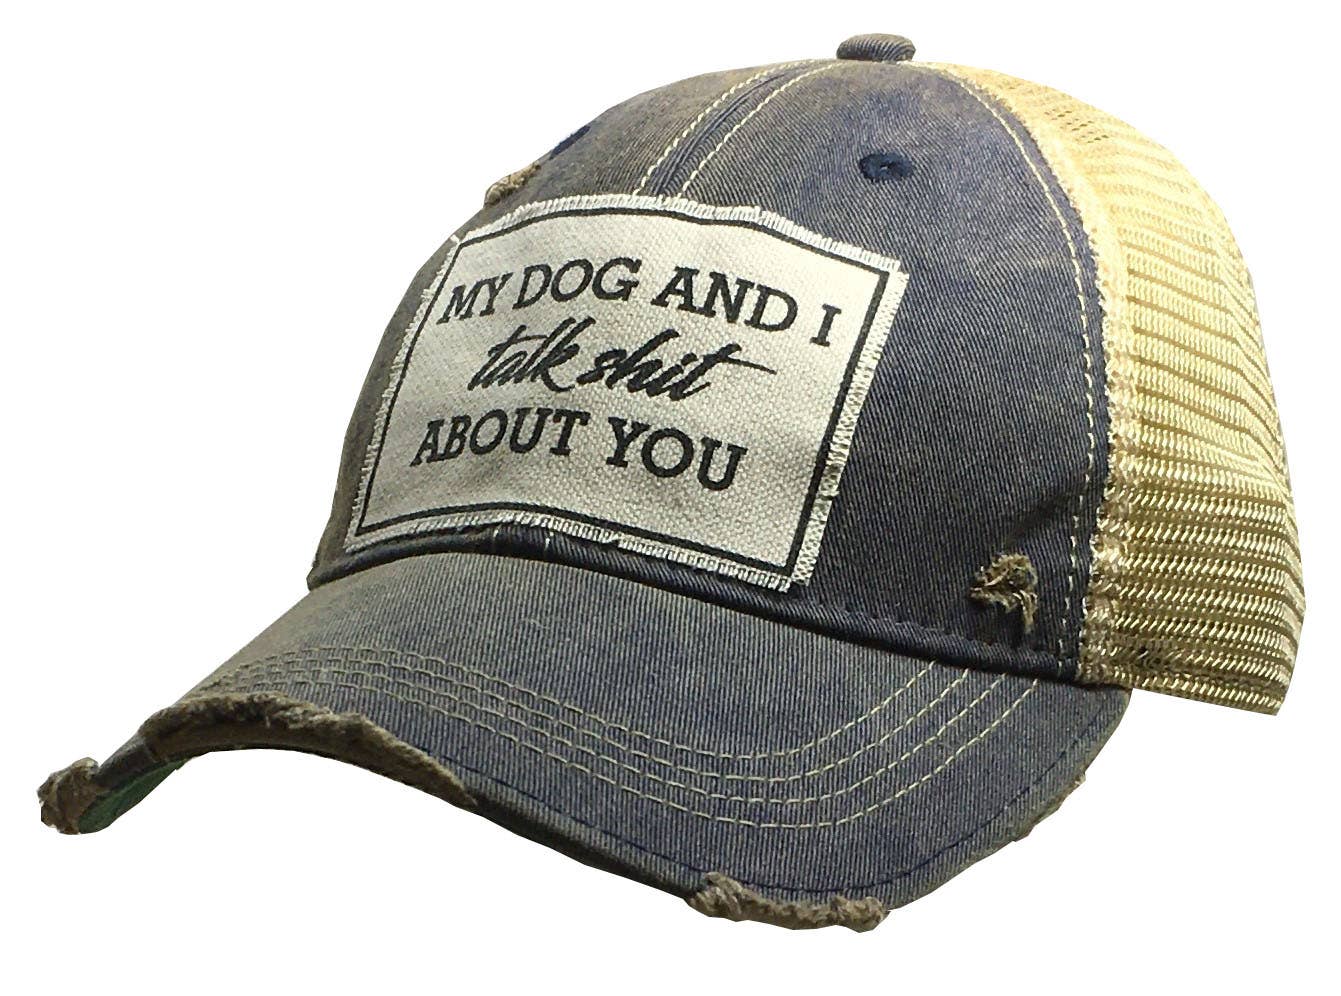 My Dog And I Talk Shit About You Trucker Hat Baseball Cap